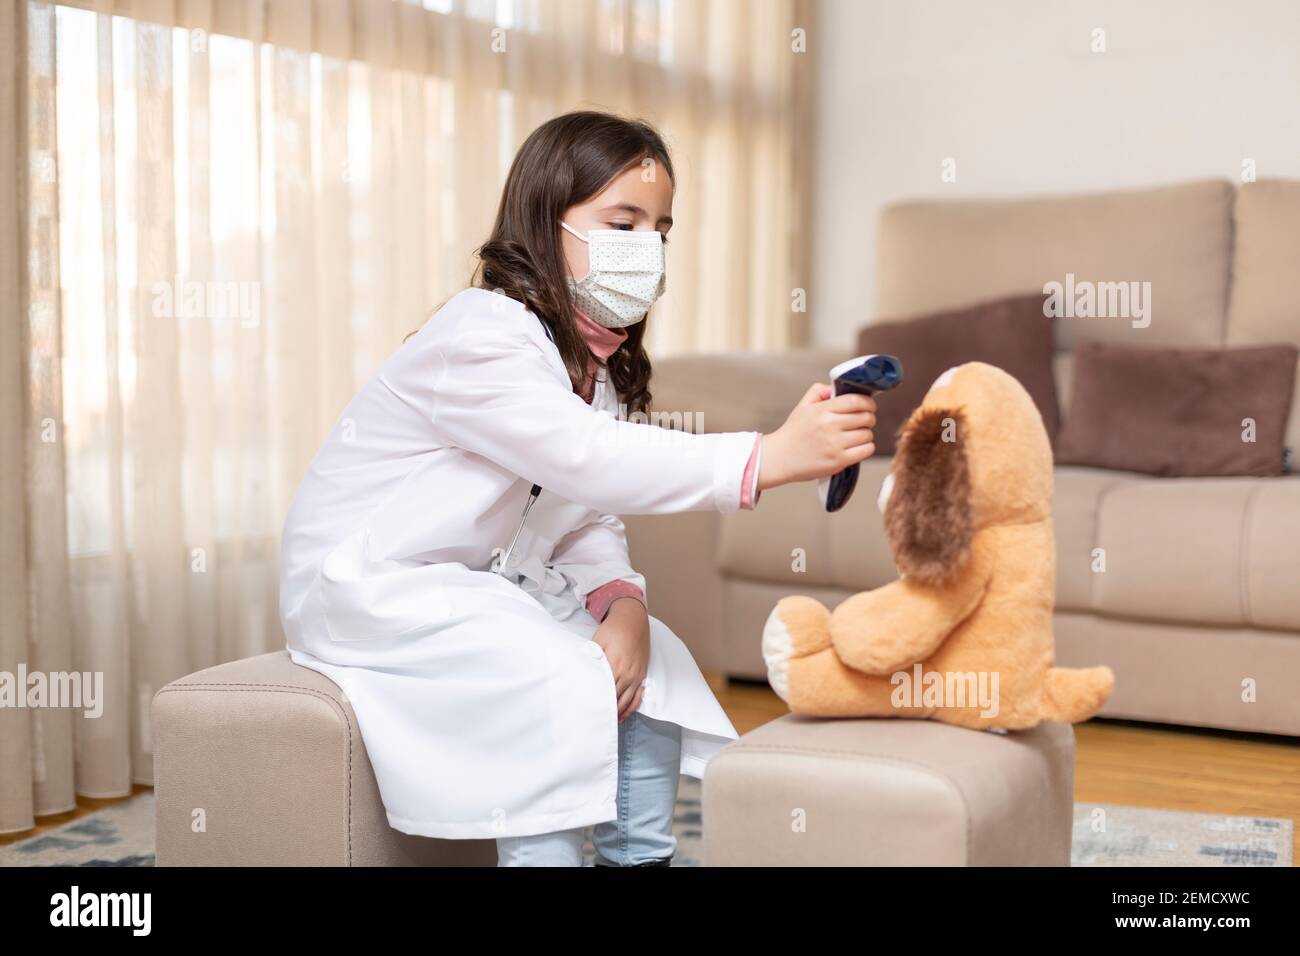 Little girl dressed as a doctor and medical mask taking the temperature of a teddy bear with an infrared thermometer. She is at home. Space for text. Stock Photo